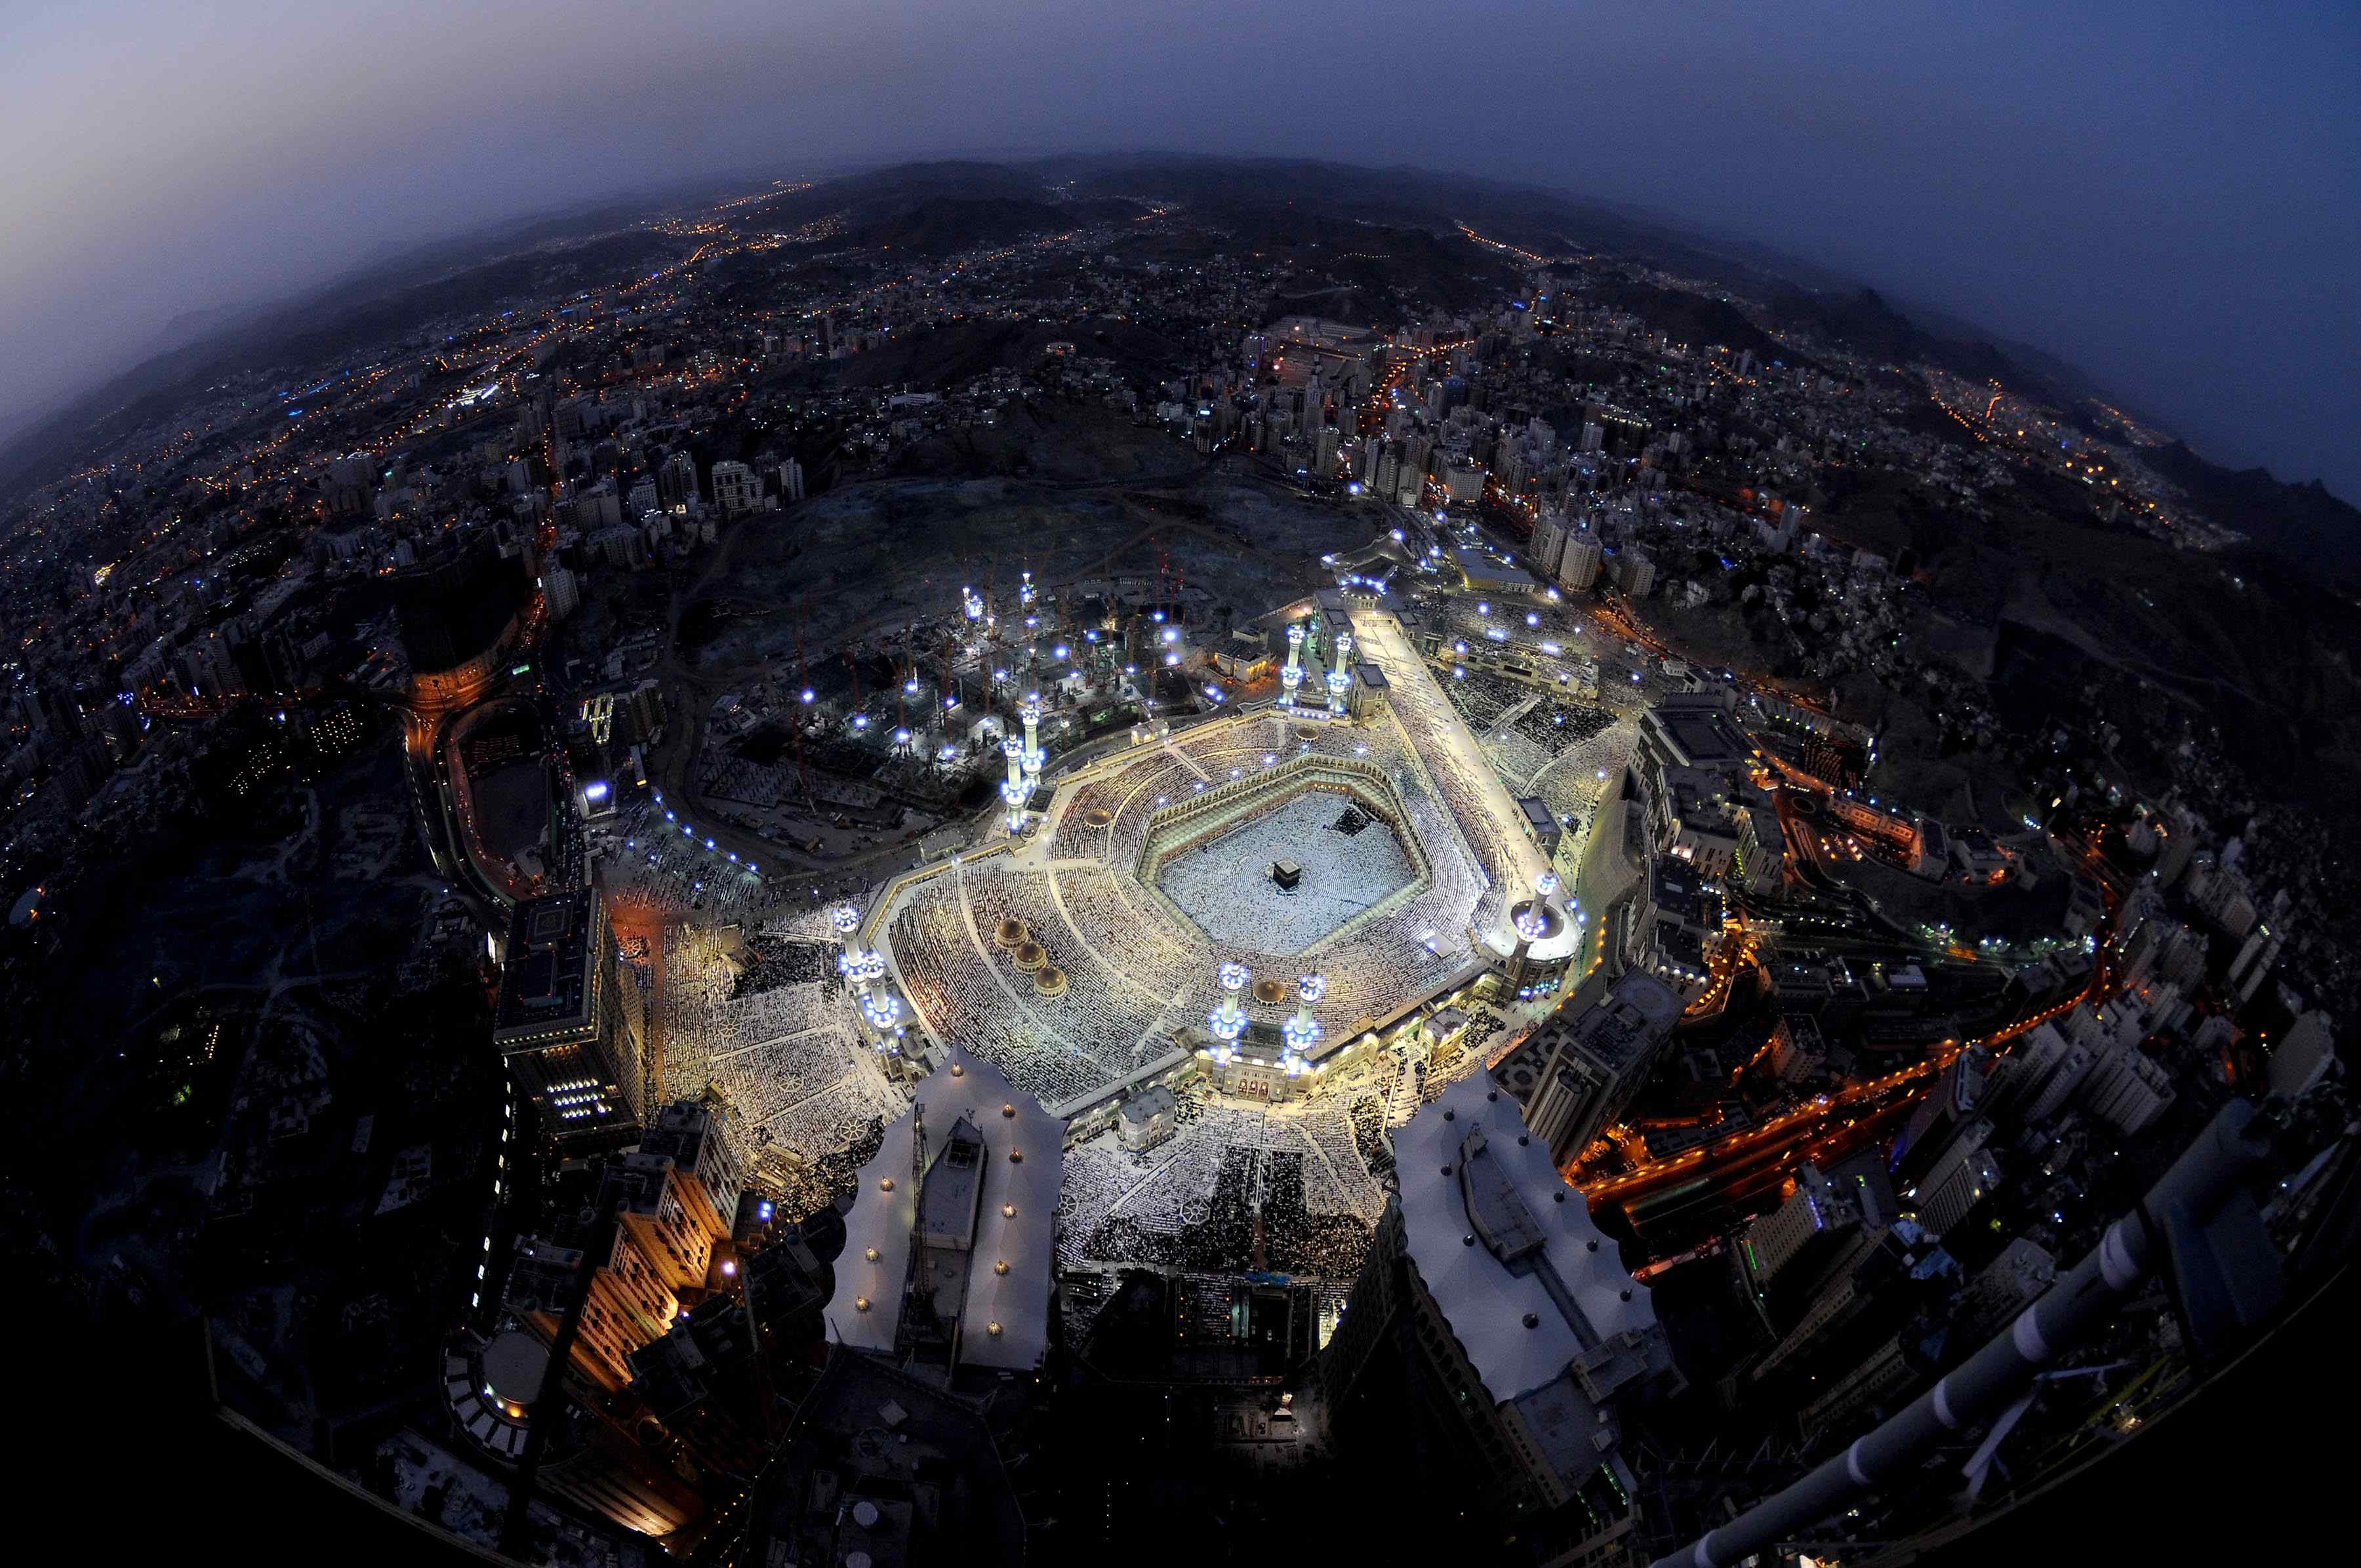 General 3600x2391 cityscape aerial view lights Makkah mosque Islam